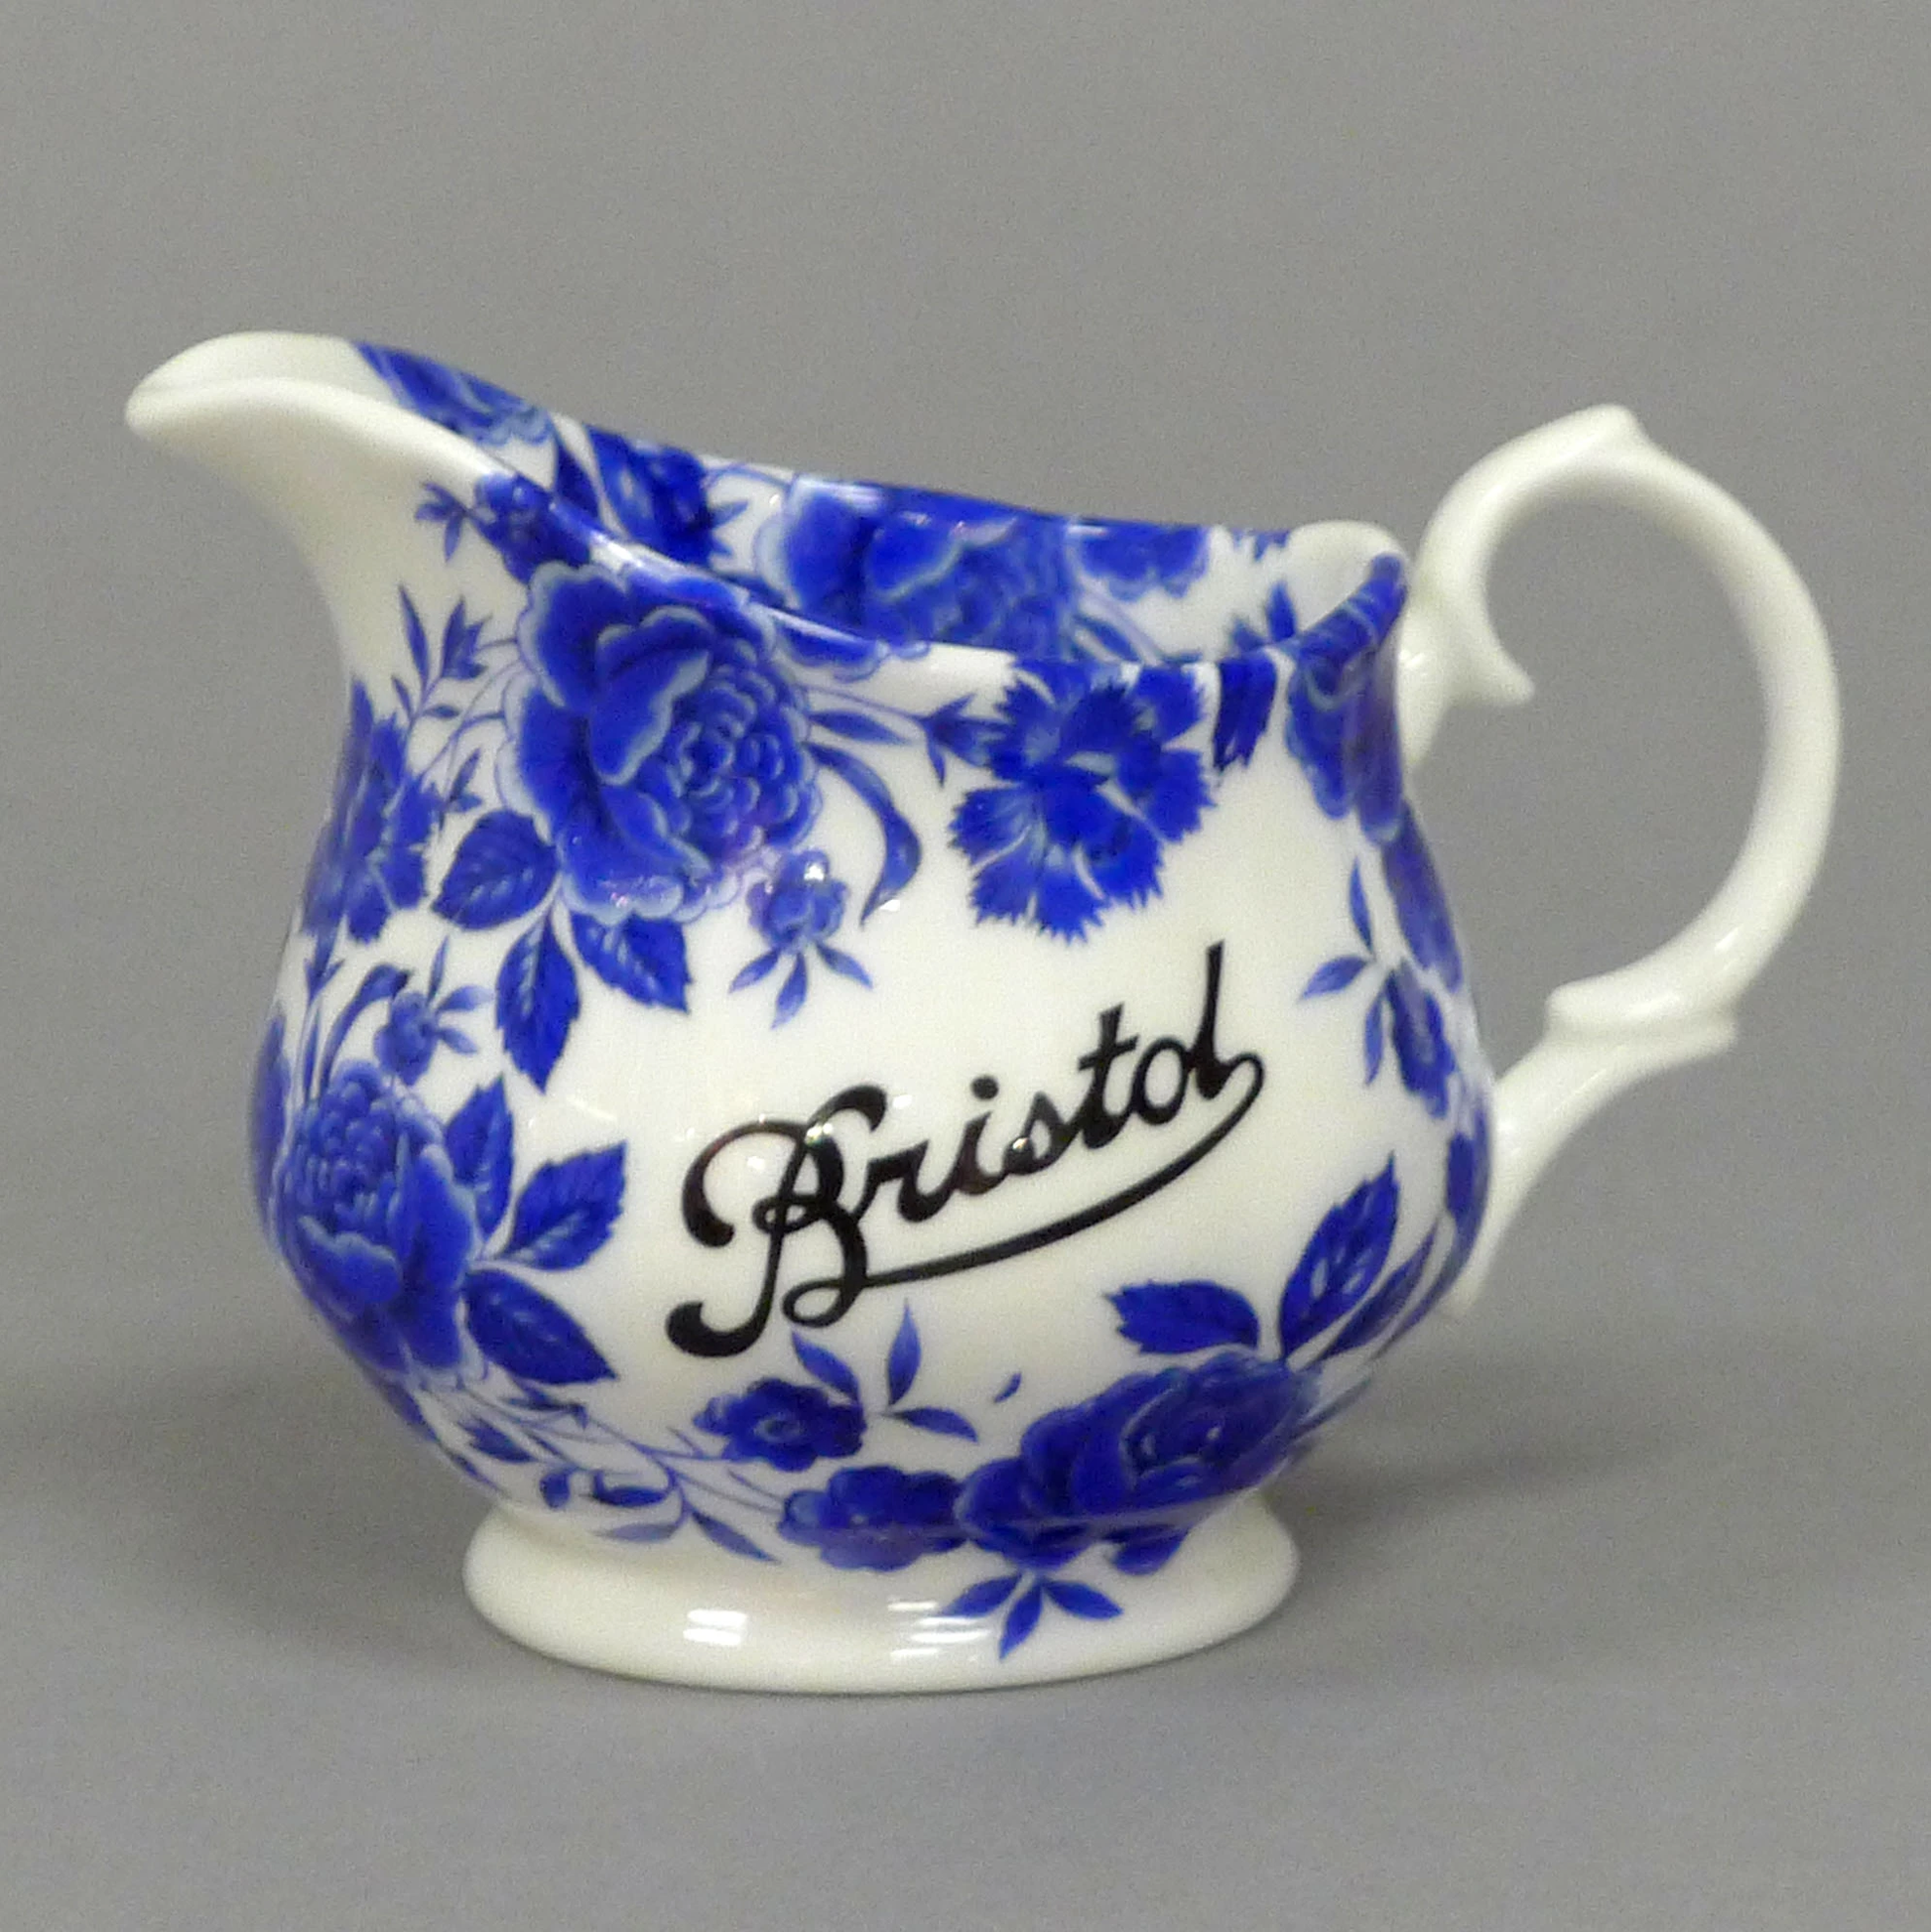 Bristol Blue Floral jug made by Stokes Croft China in Bristol